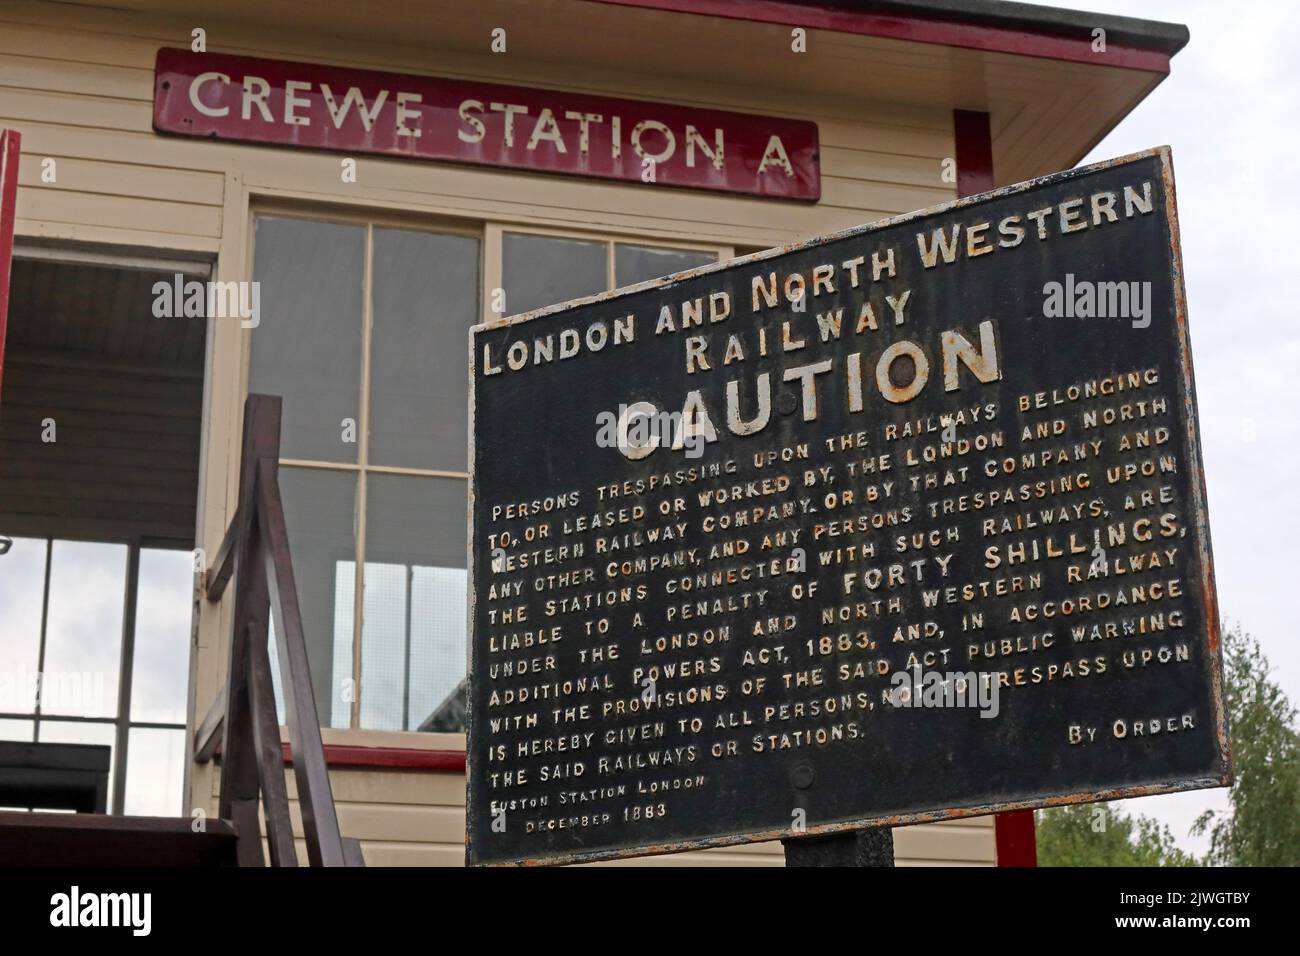 Crewe station A signal box and LNWR London and north Western Railway, caution sign, no trespassing at Crewe, Cheshire, England, UK, CW1 Stock Photo